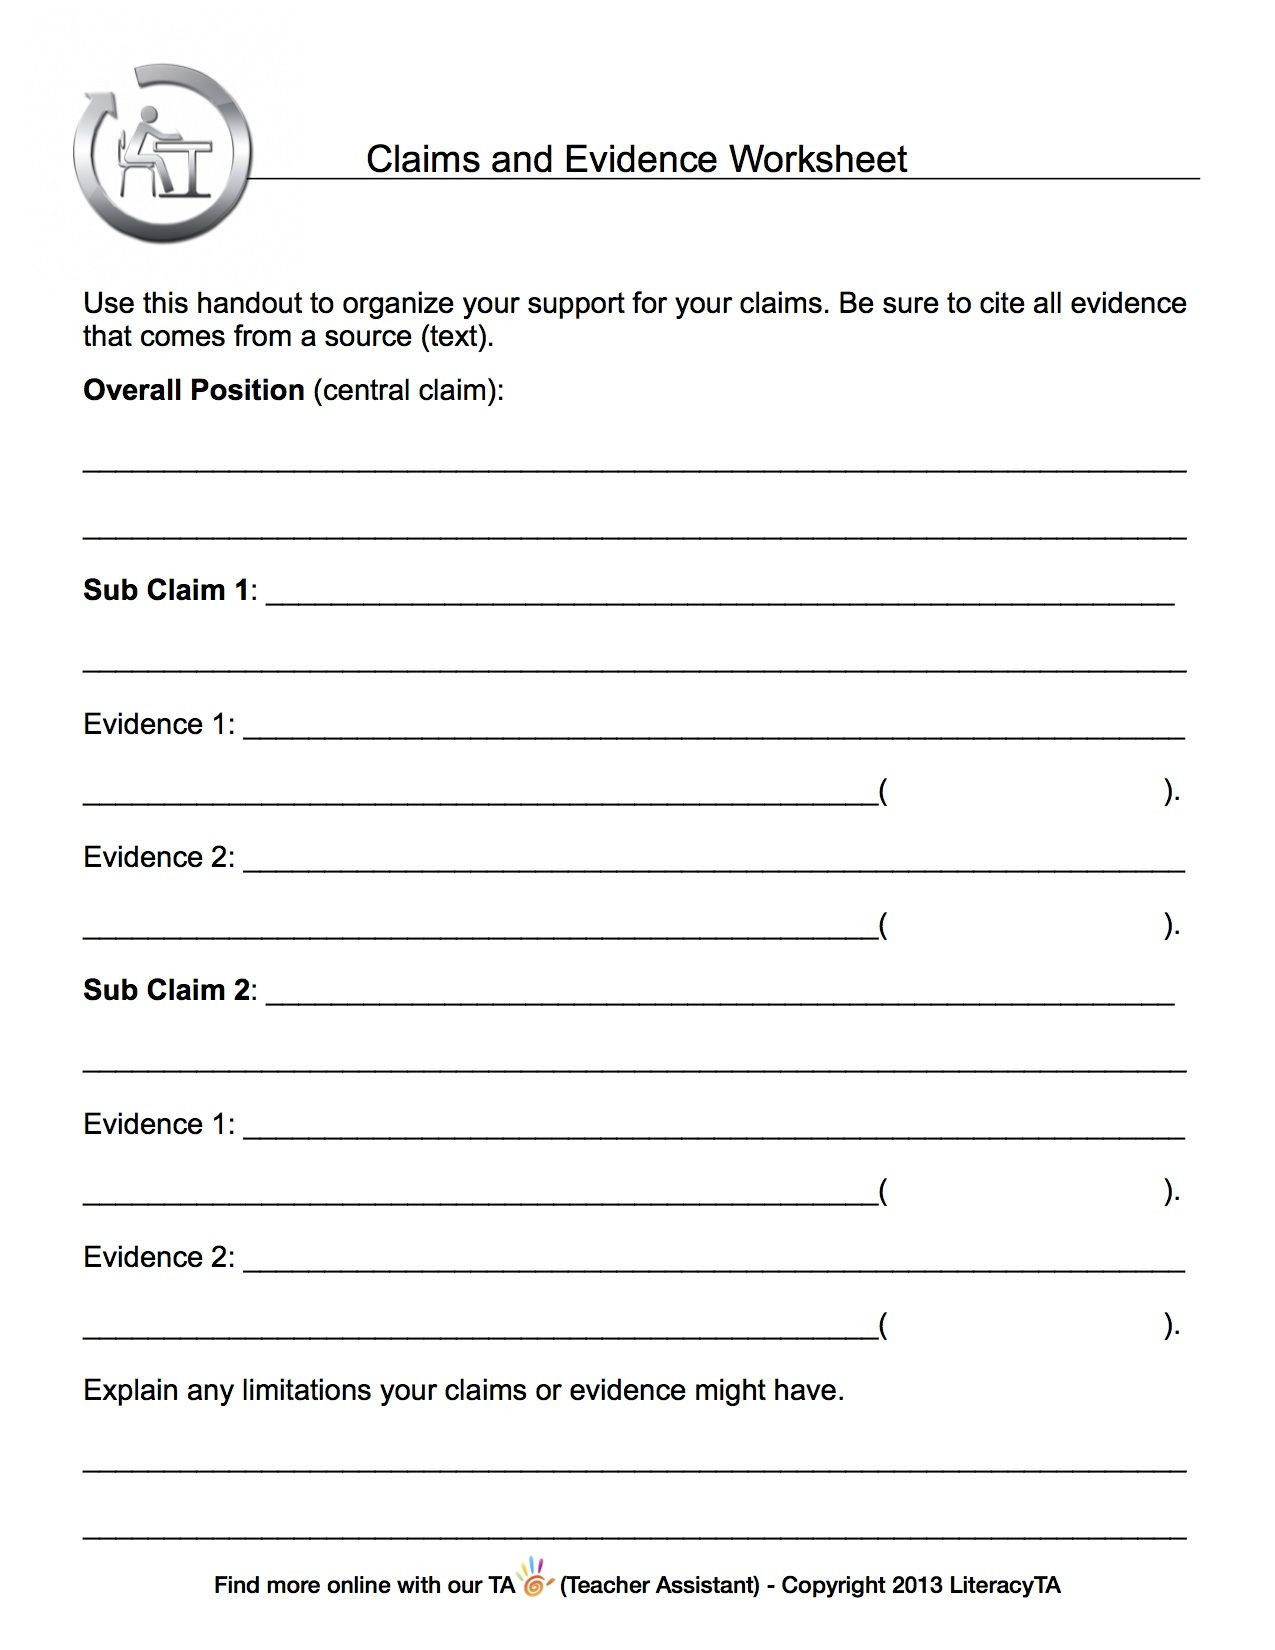 Citing Textual Evidence Worksheet Claims Evidence Worksheet